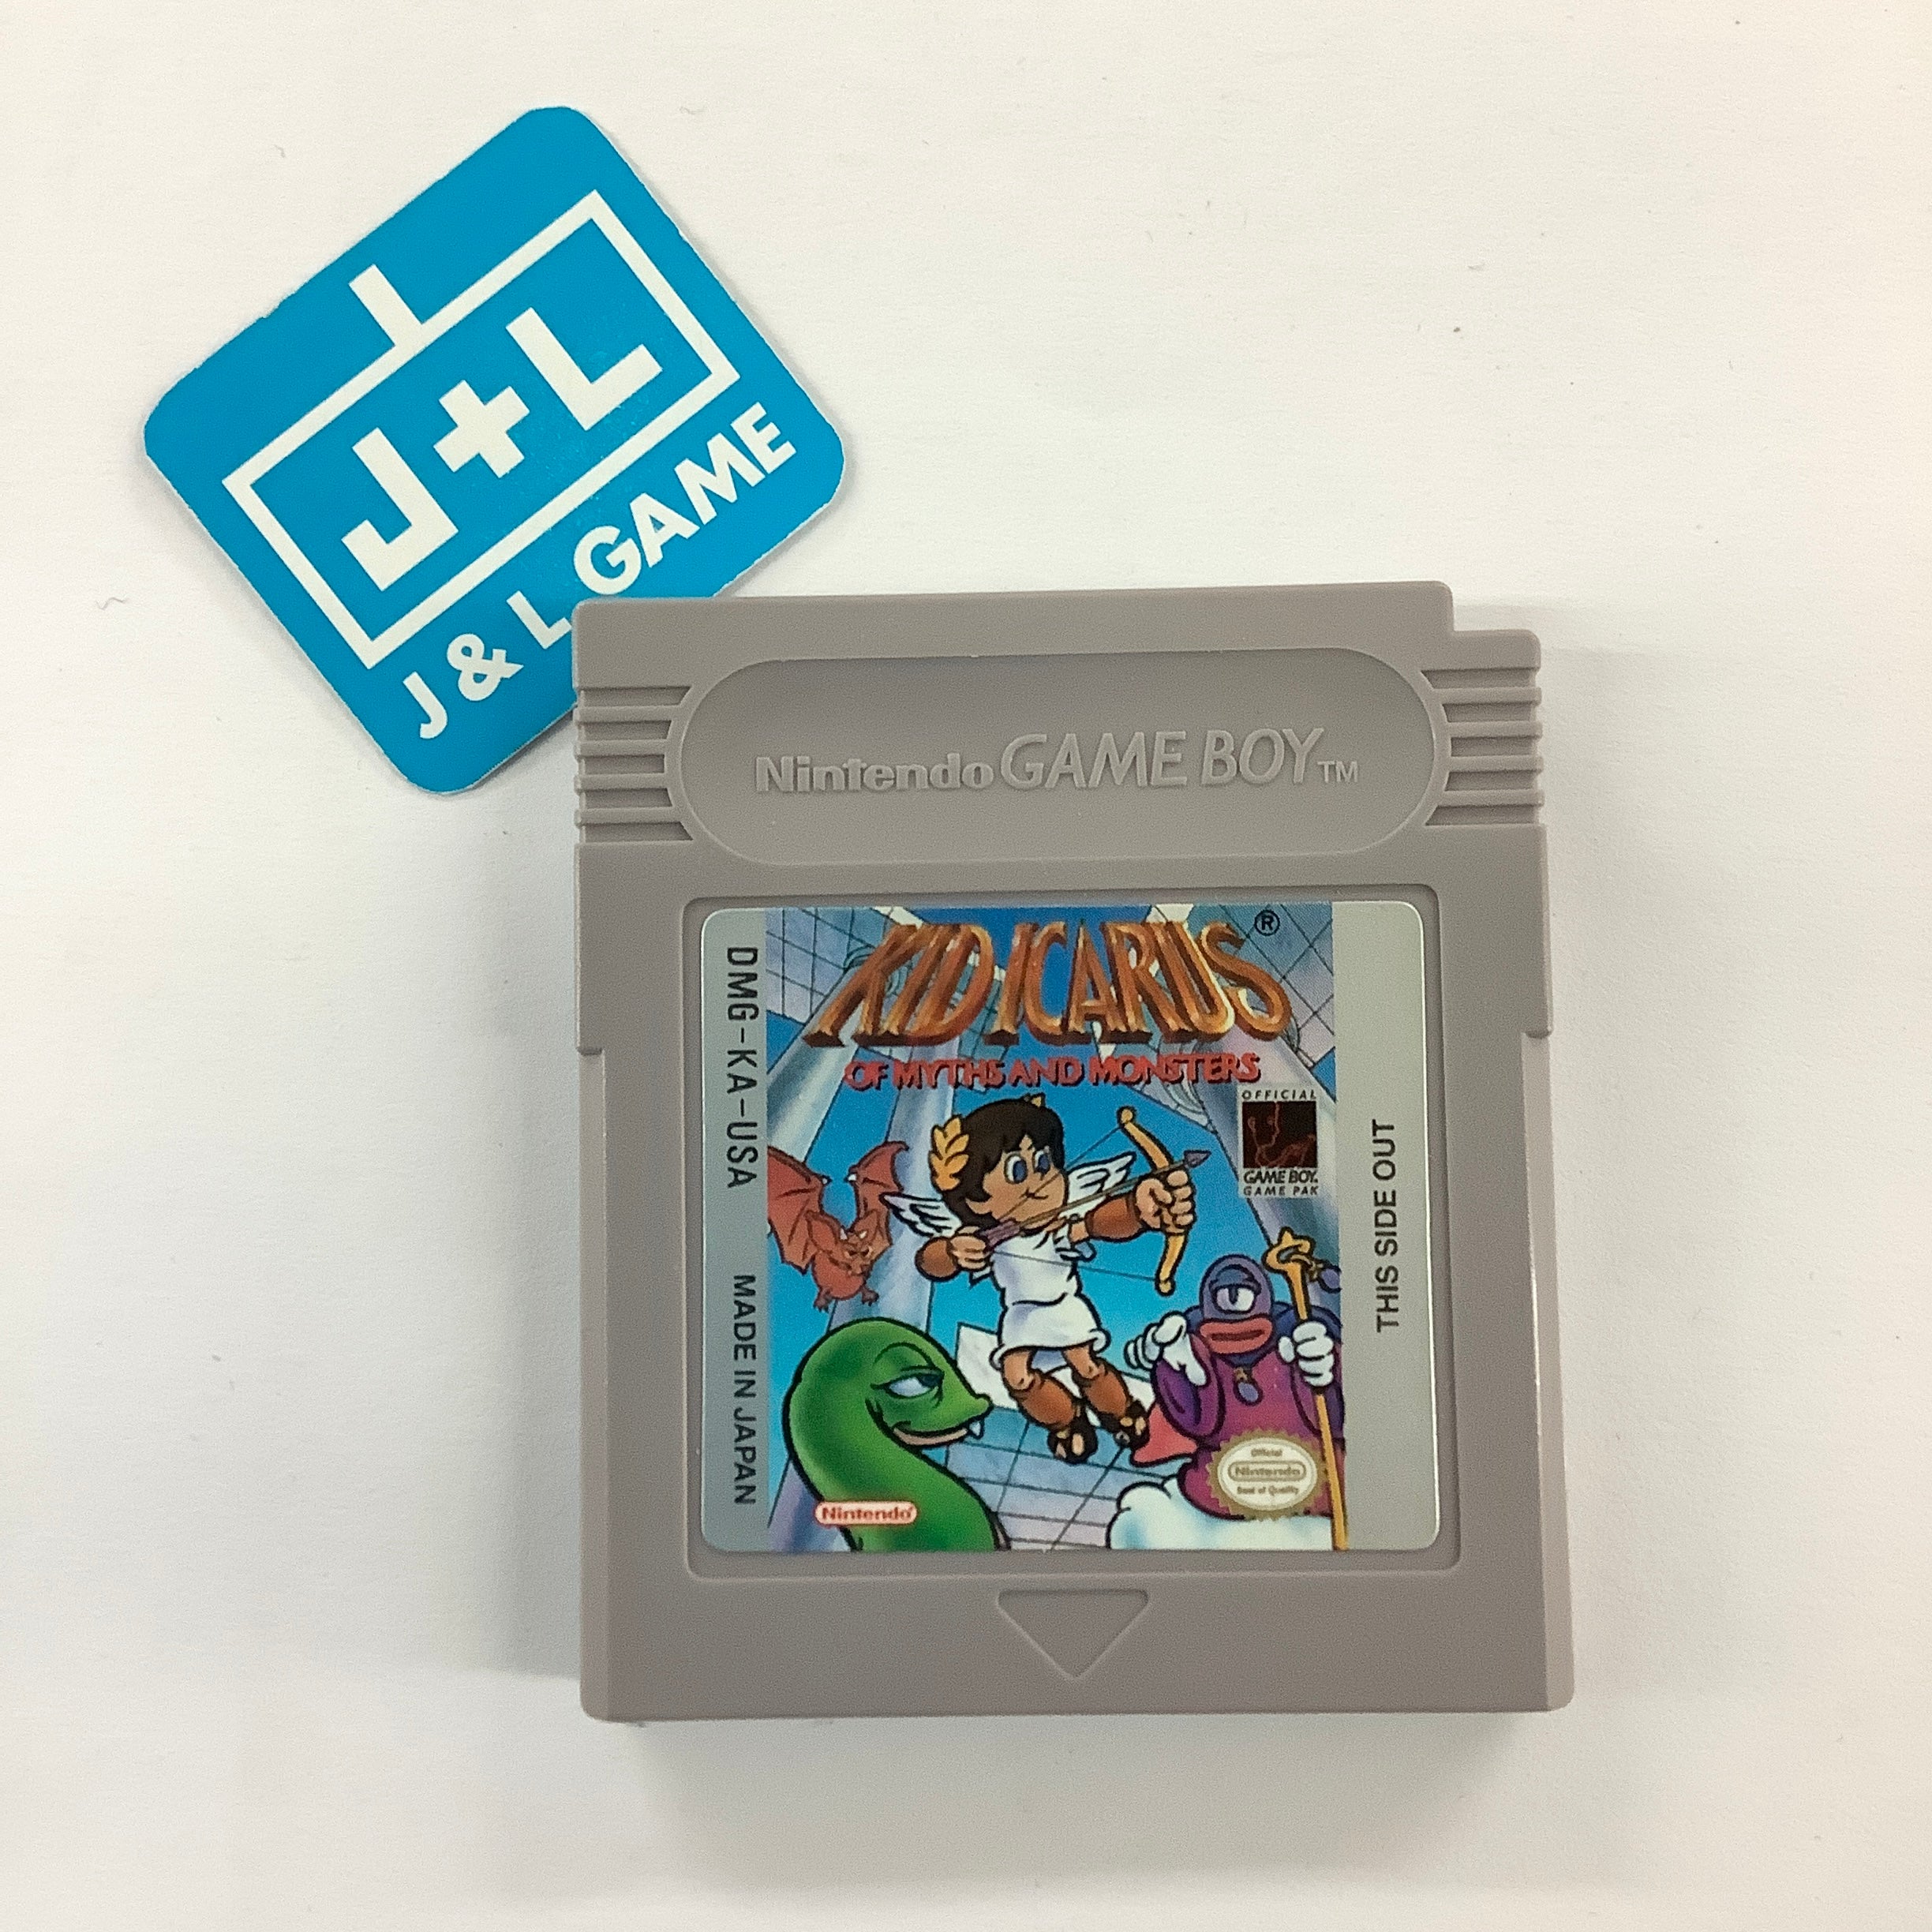 Kid Icarus of Myths and Monsters - (GB) Game Boy [Pre-Owned] Video Games Nintendo   